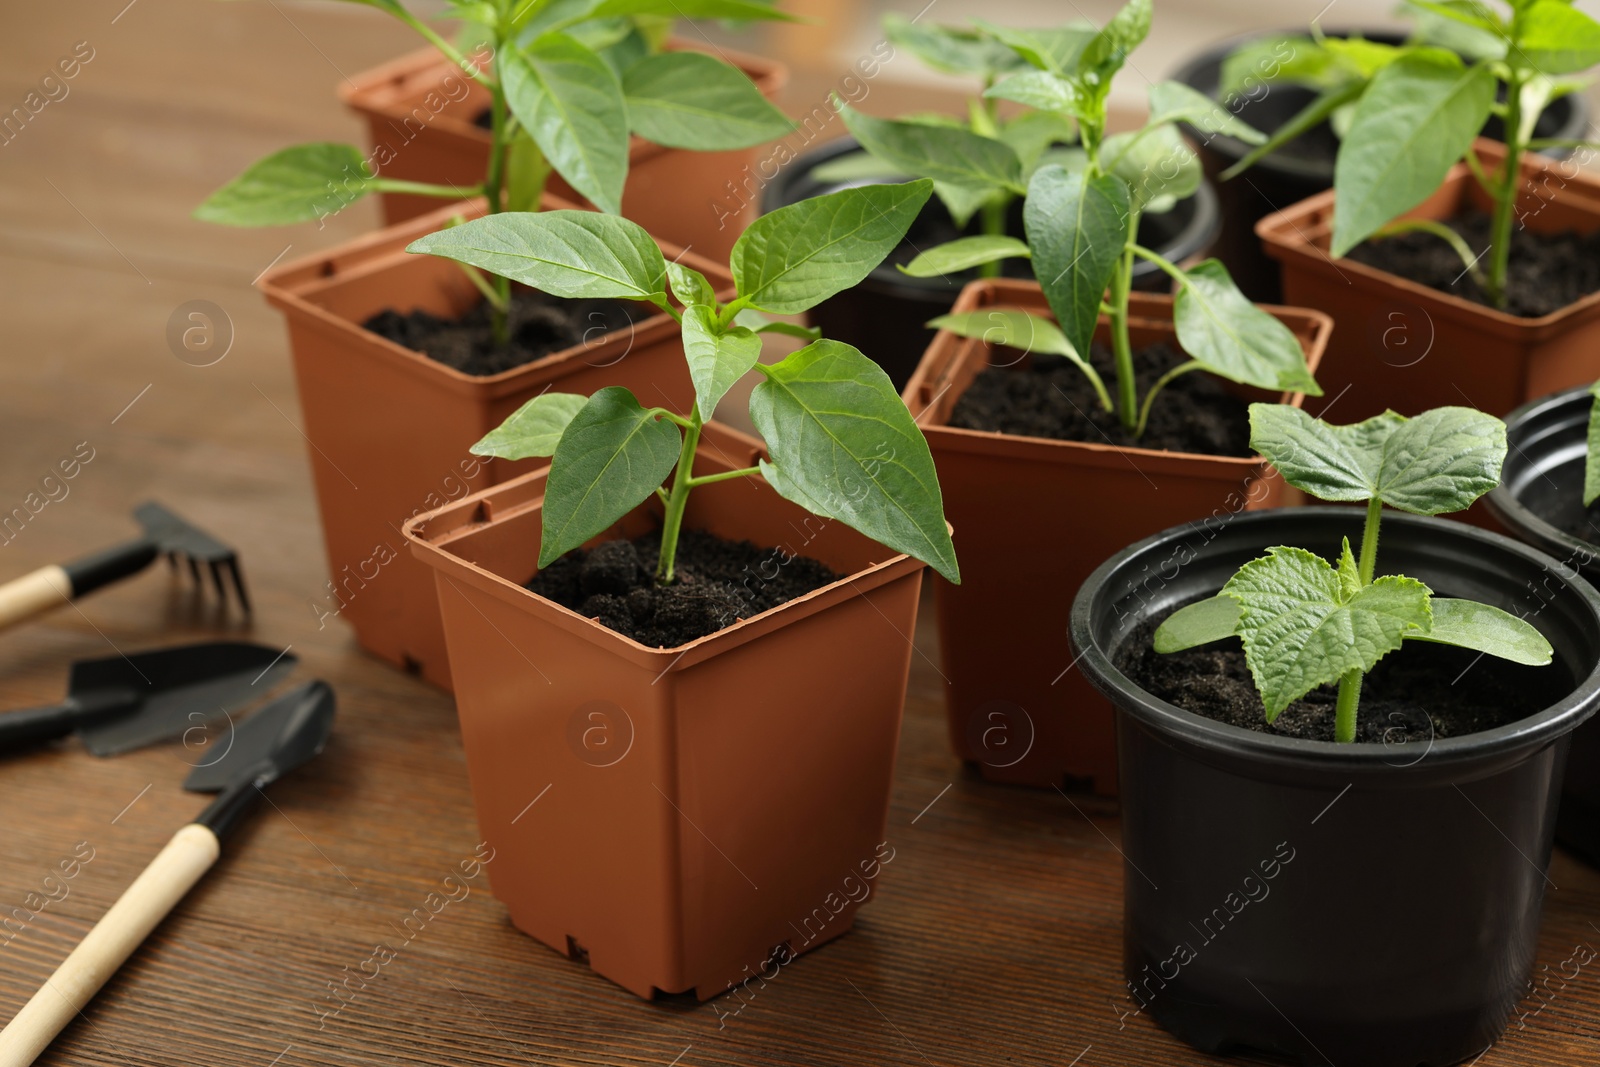 Photo of Seedlings growing in plastic containers with soil and gardening tools on wooden table